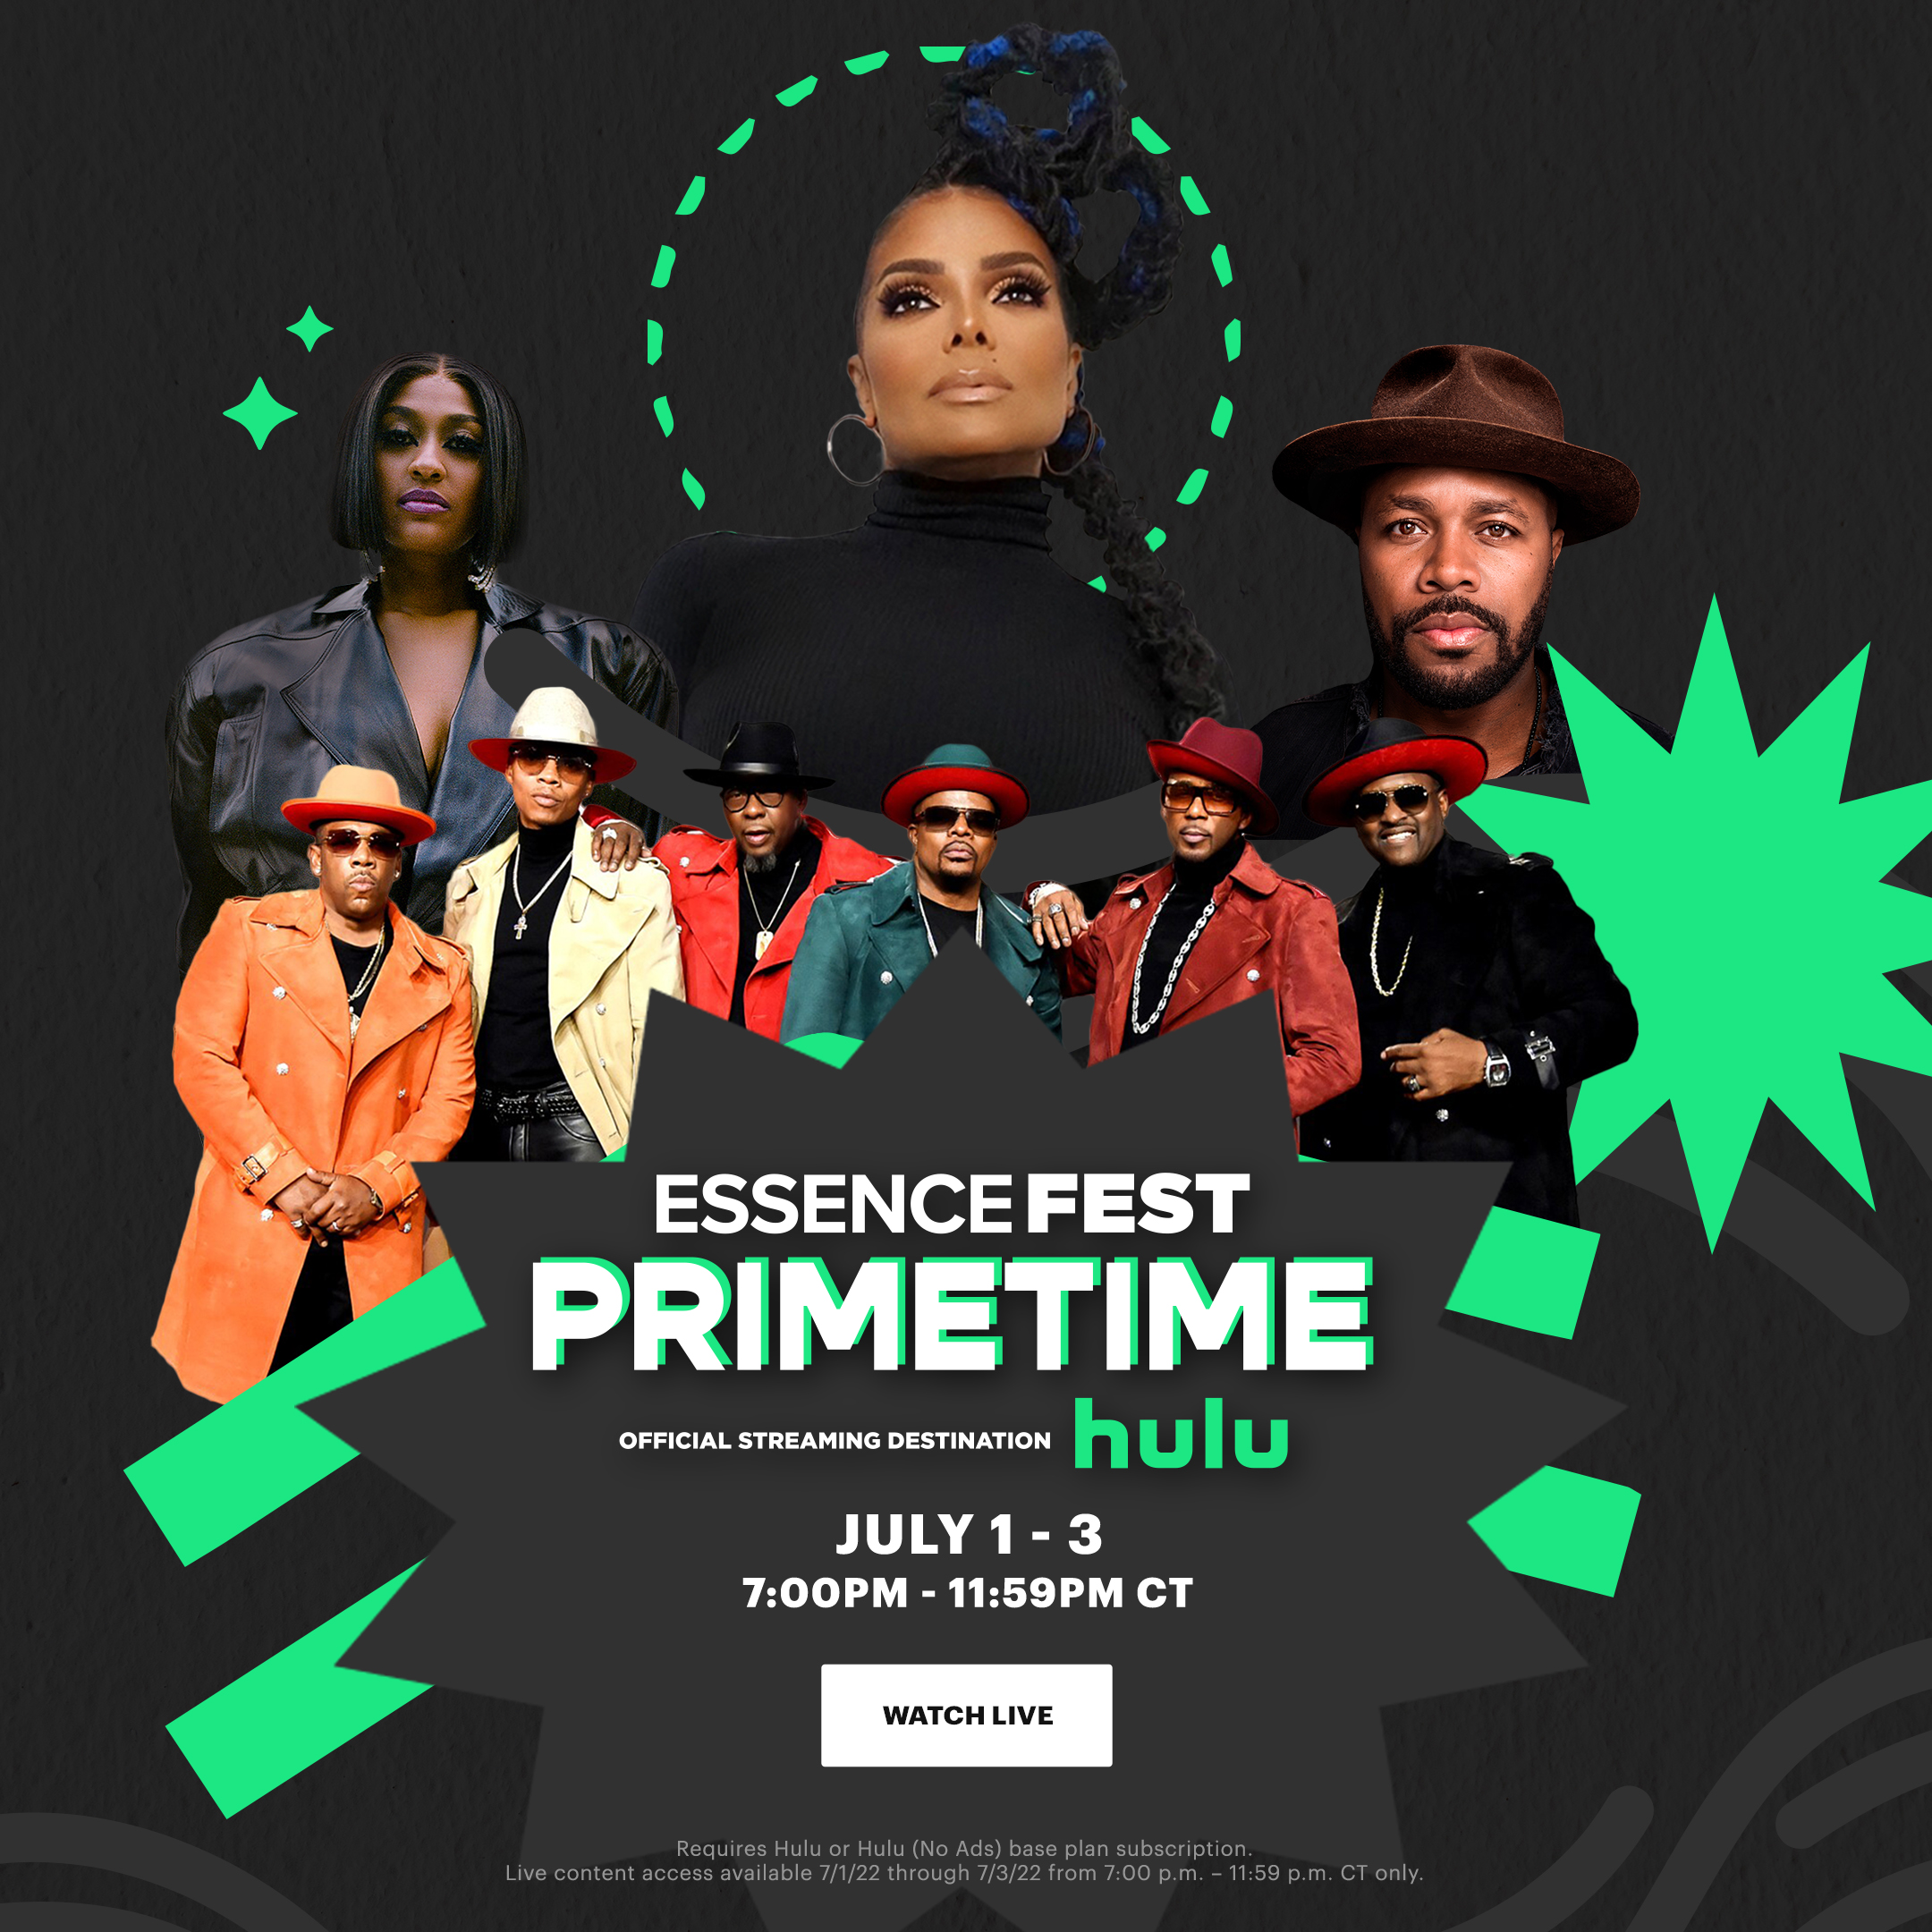 Hulu Is the 'Essence Fest Primetime' Official Streaming Destination for